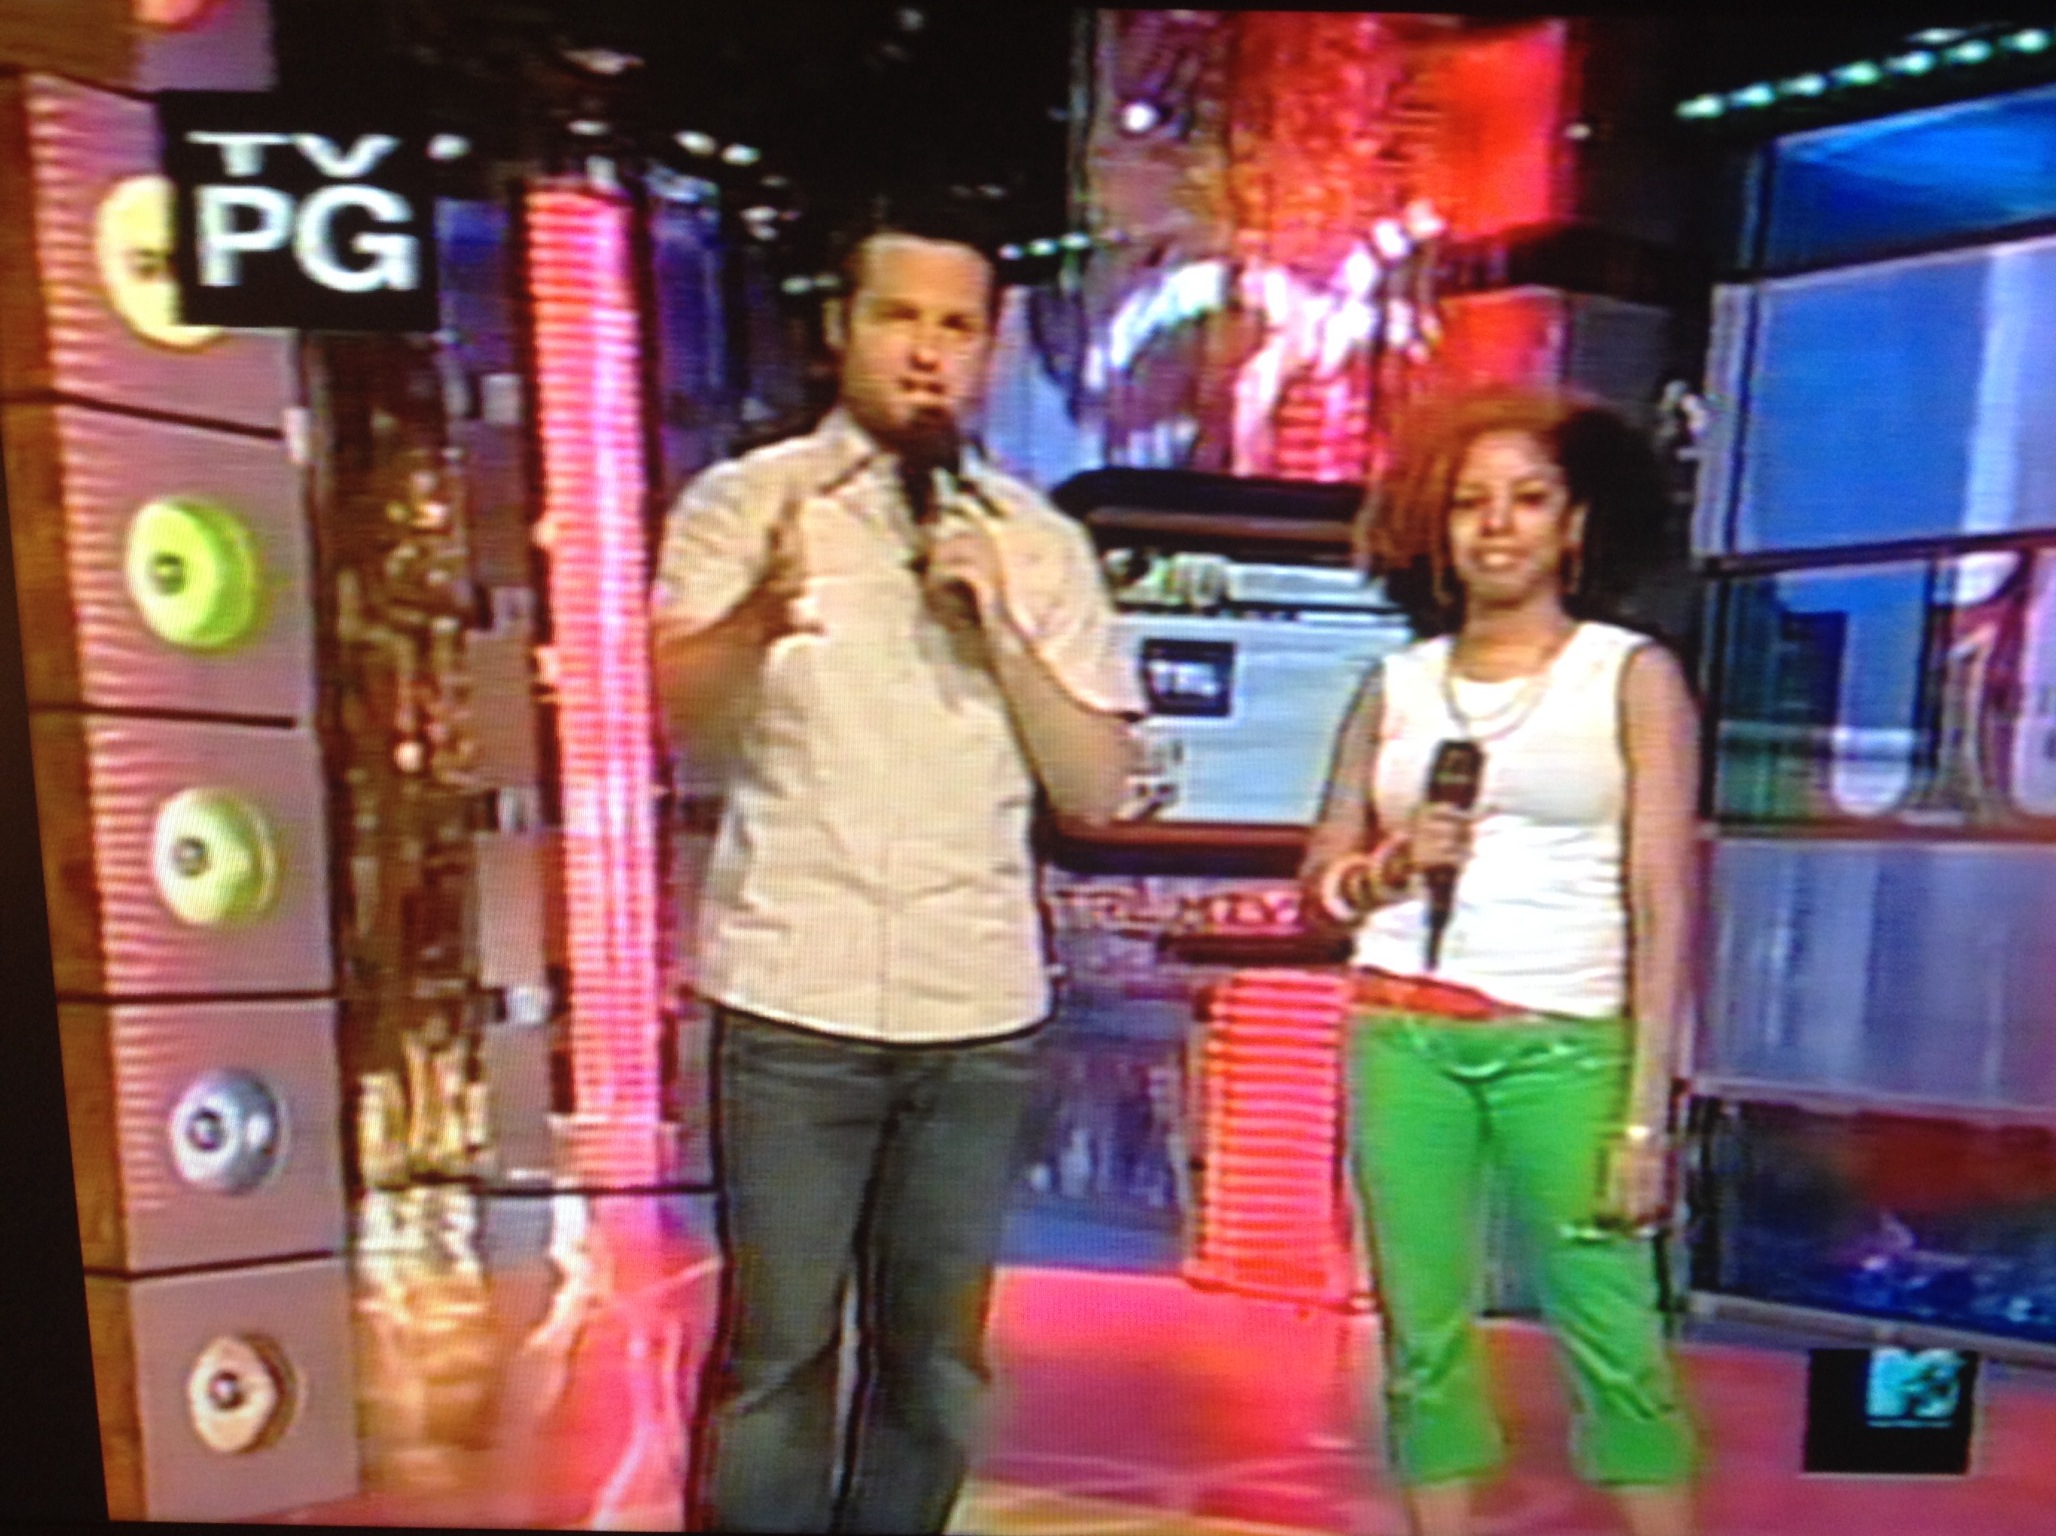 Guest Performance & live interview on MTV's Total Request Live (TRL) with Damien Fahey.